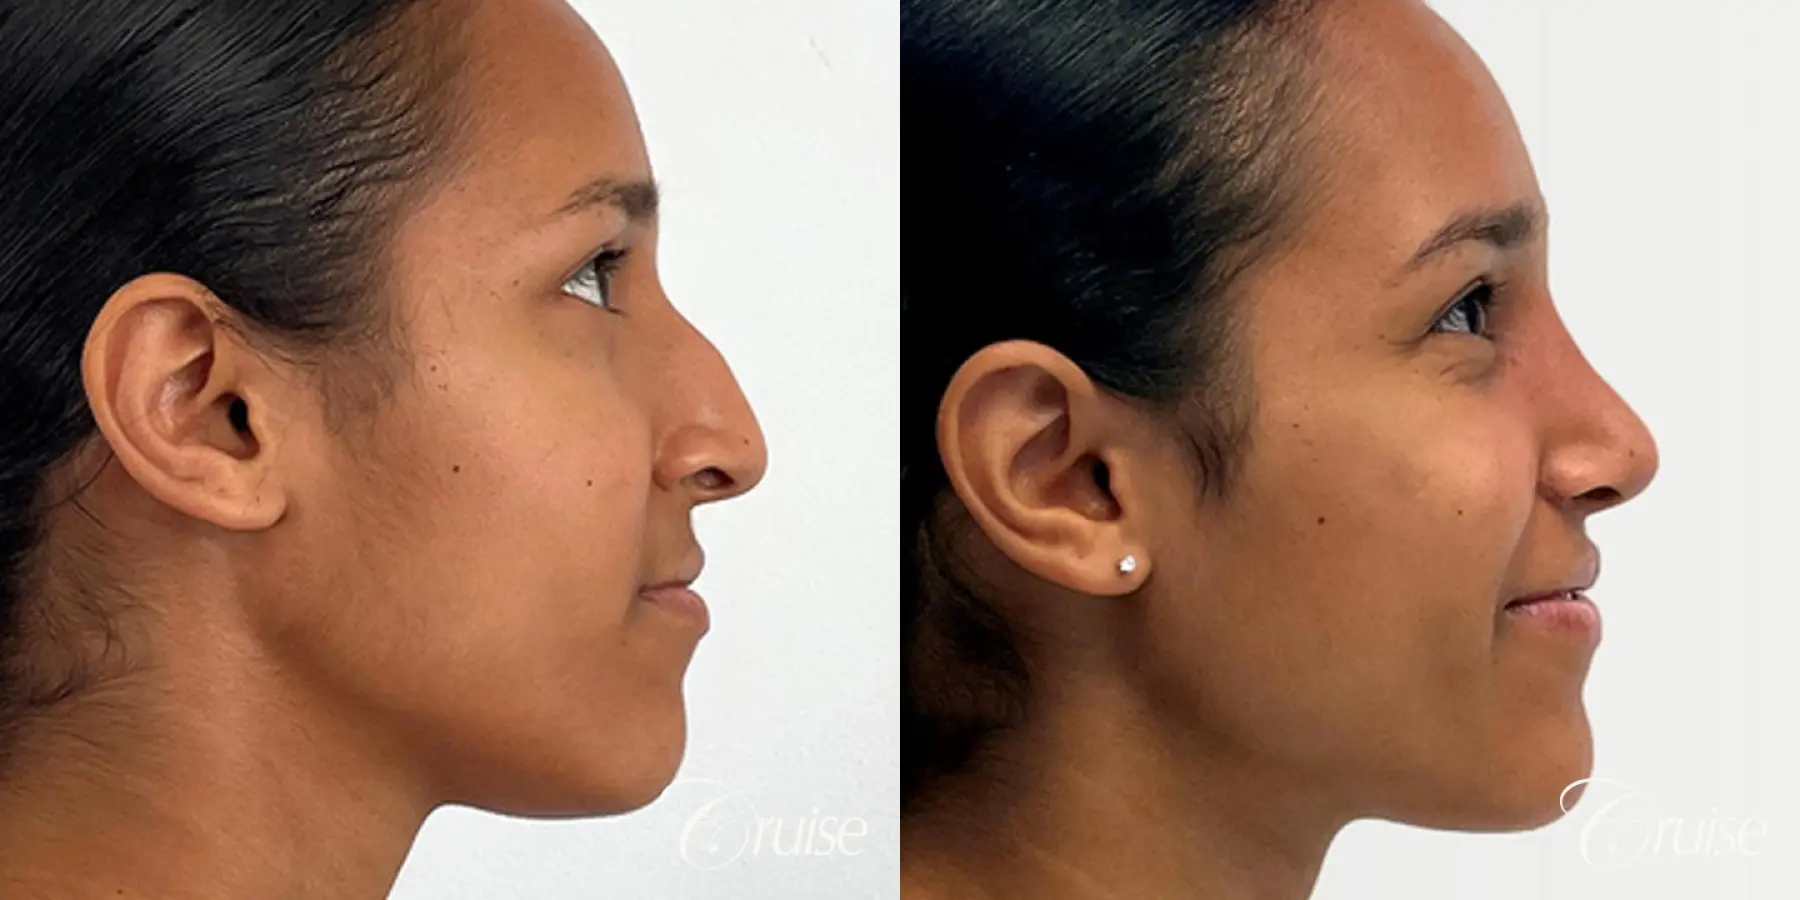 Open Ethnic Rhinoplasty - Before and After 4